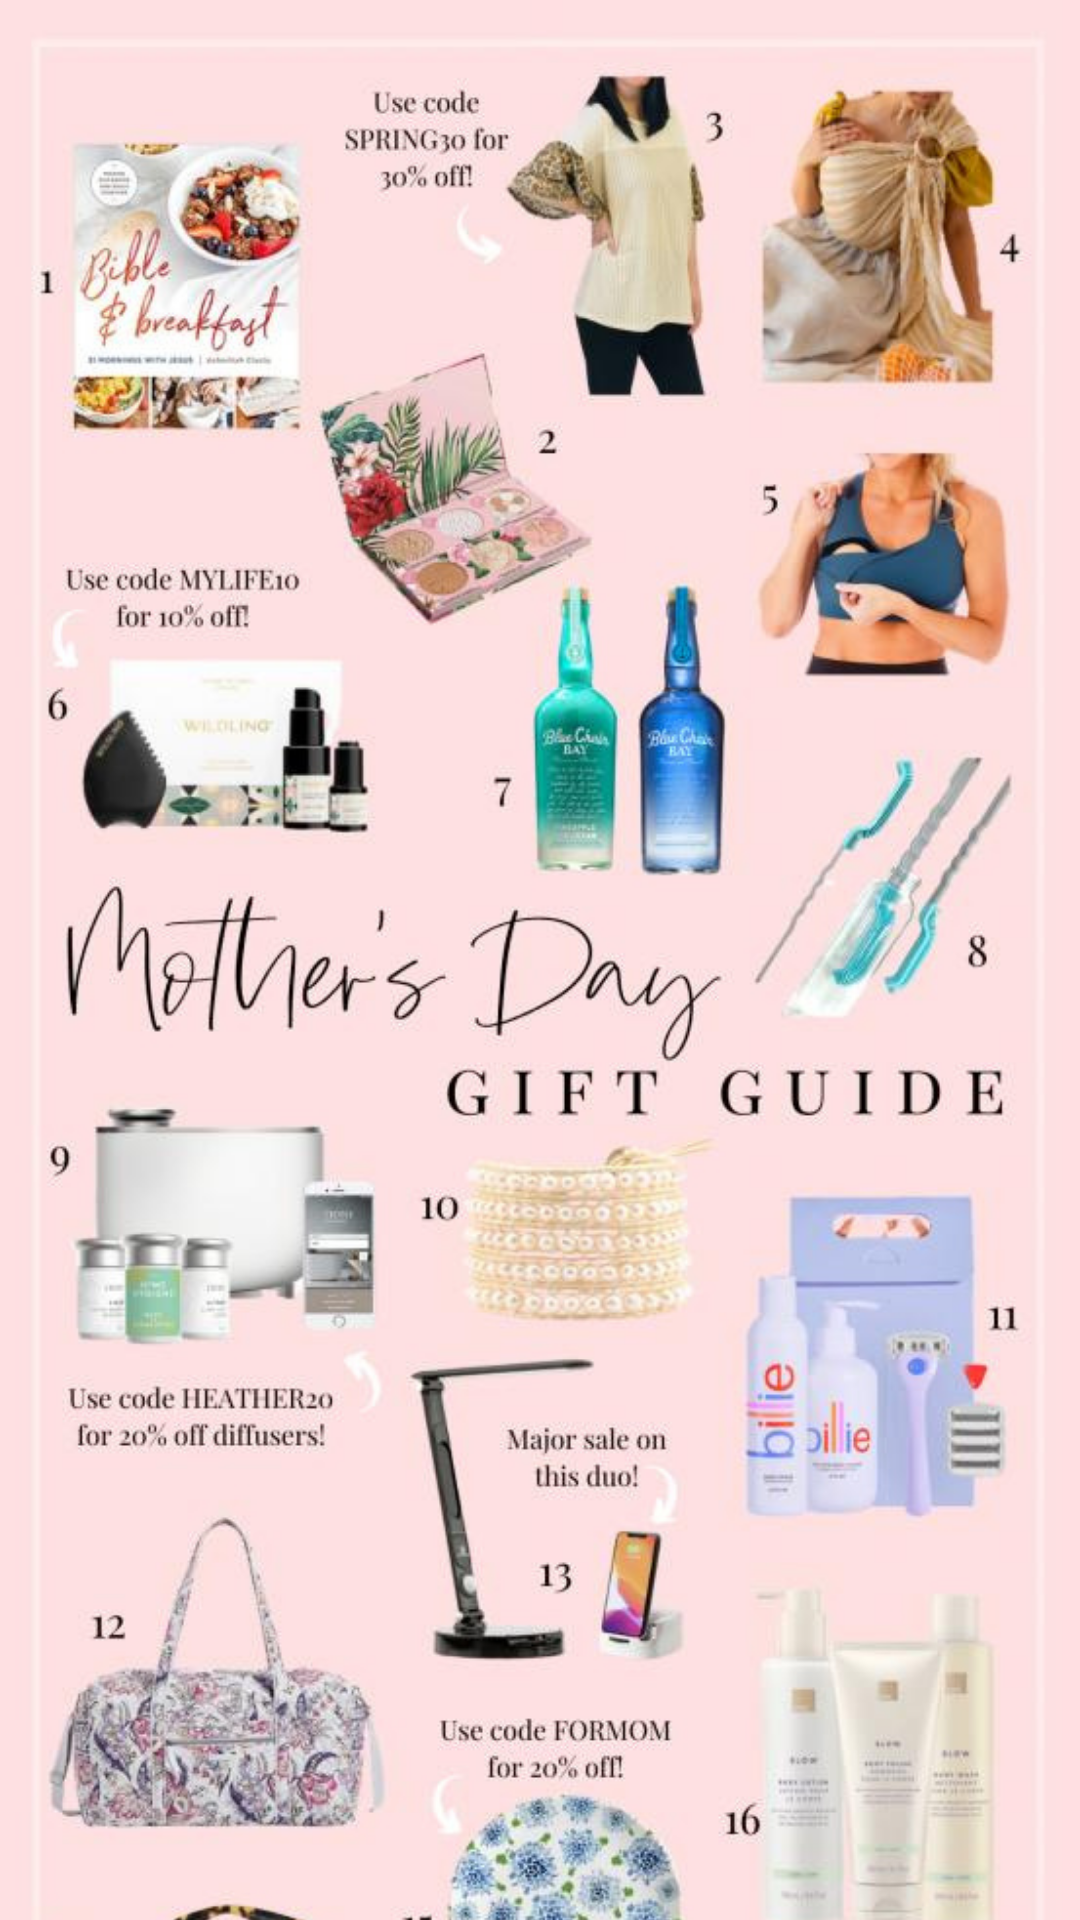 Mom + lifestyle blogger, My Life Well Loved, shares sentimental gifts for moms! Click NOW to see what ideas she came up with! 